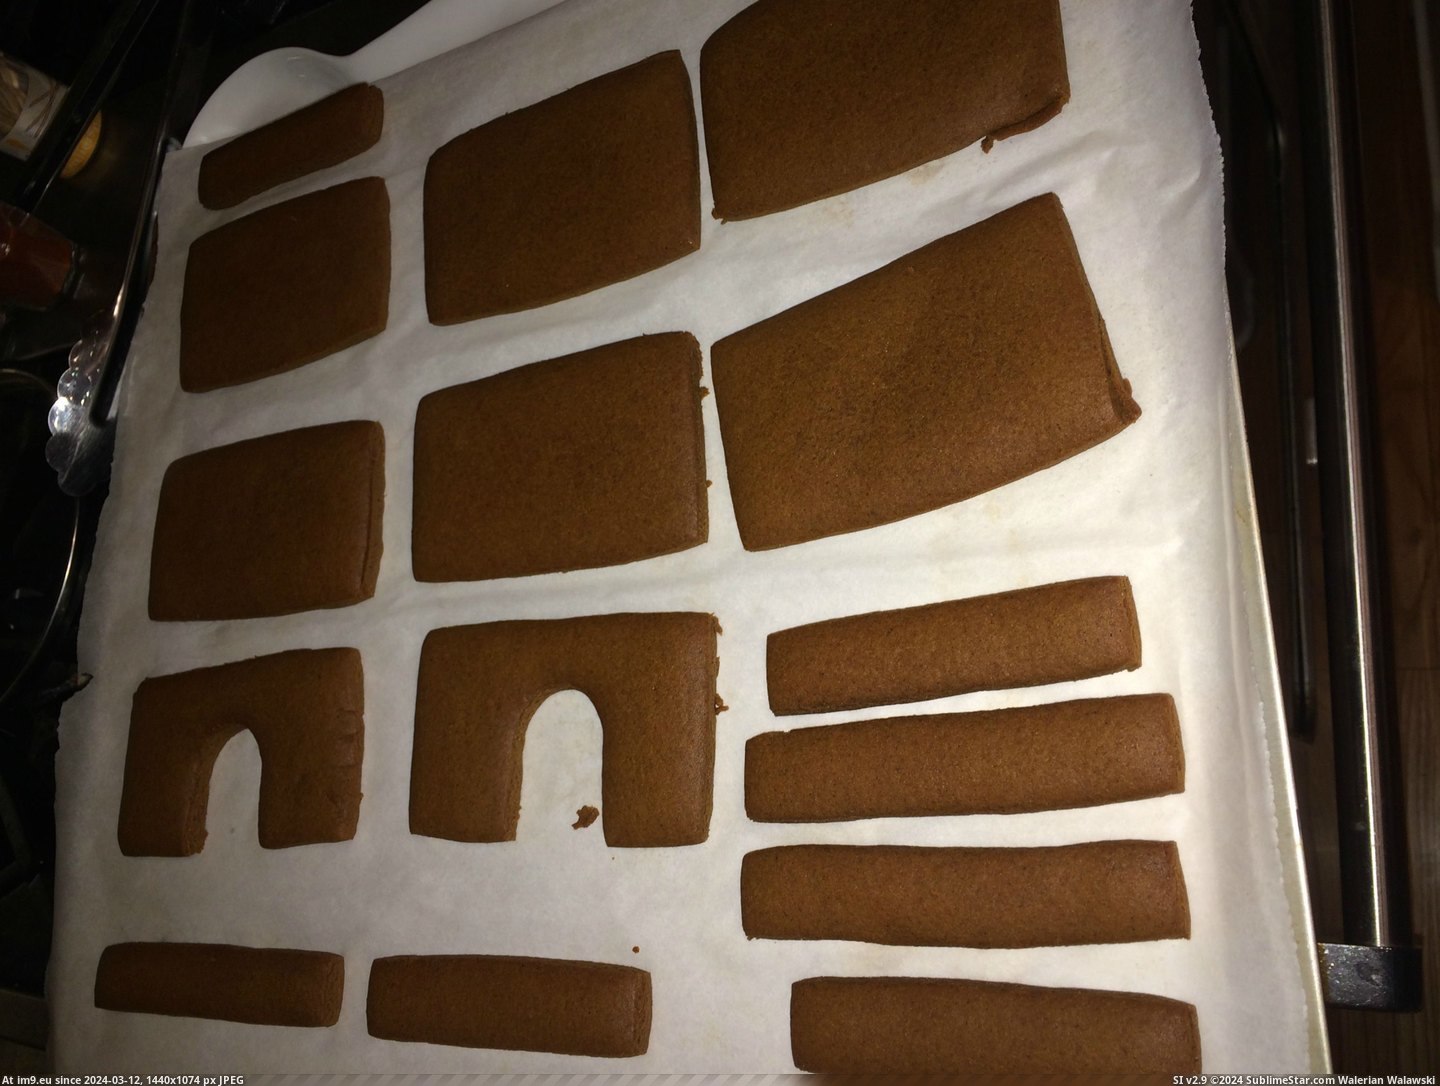 #Husband #Get #Our #Divorced #Collaborated #Project #Gingerbread #Success [Pics] My husband and I collaborated on our first gingerbread project and didn't get divorced...success! 8 Pic. (Bild von album My r/PICS favs))